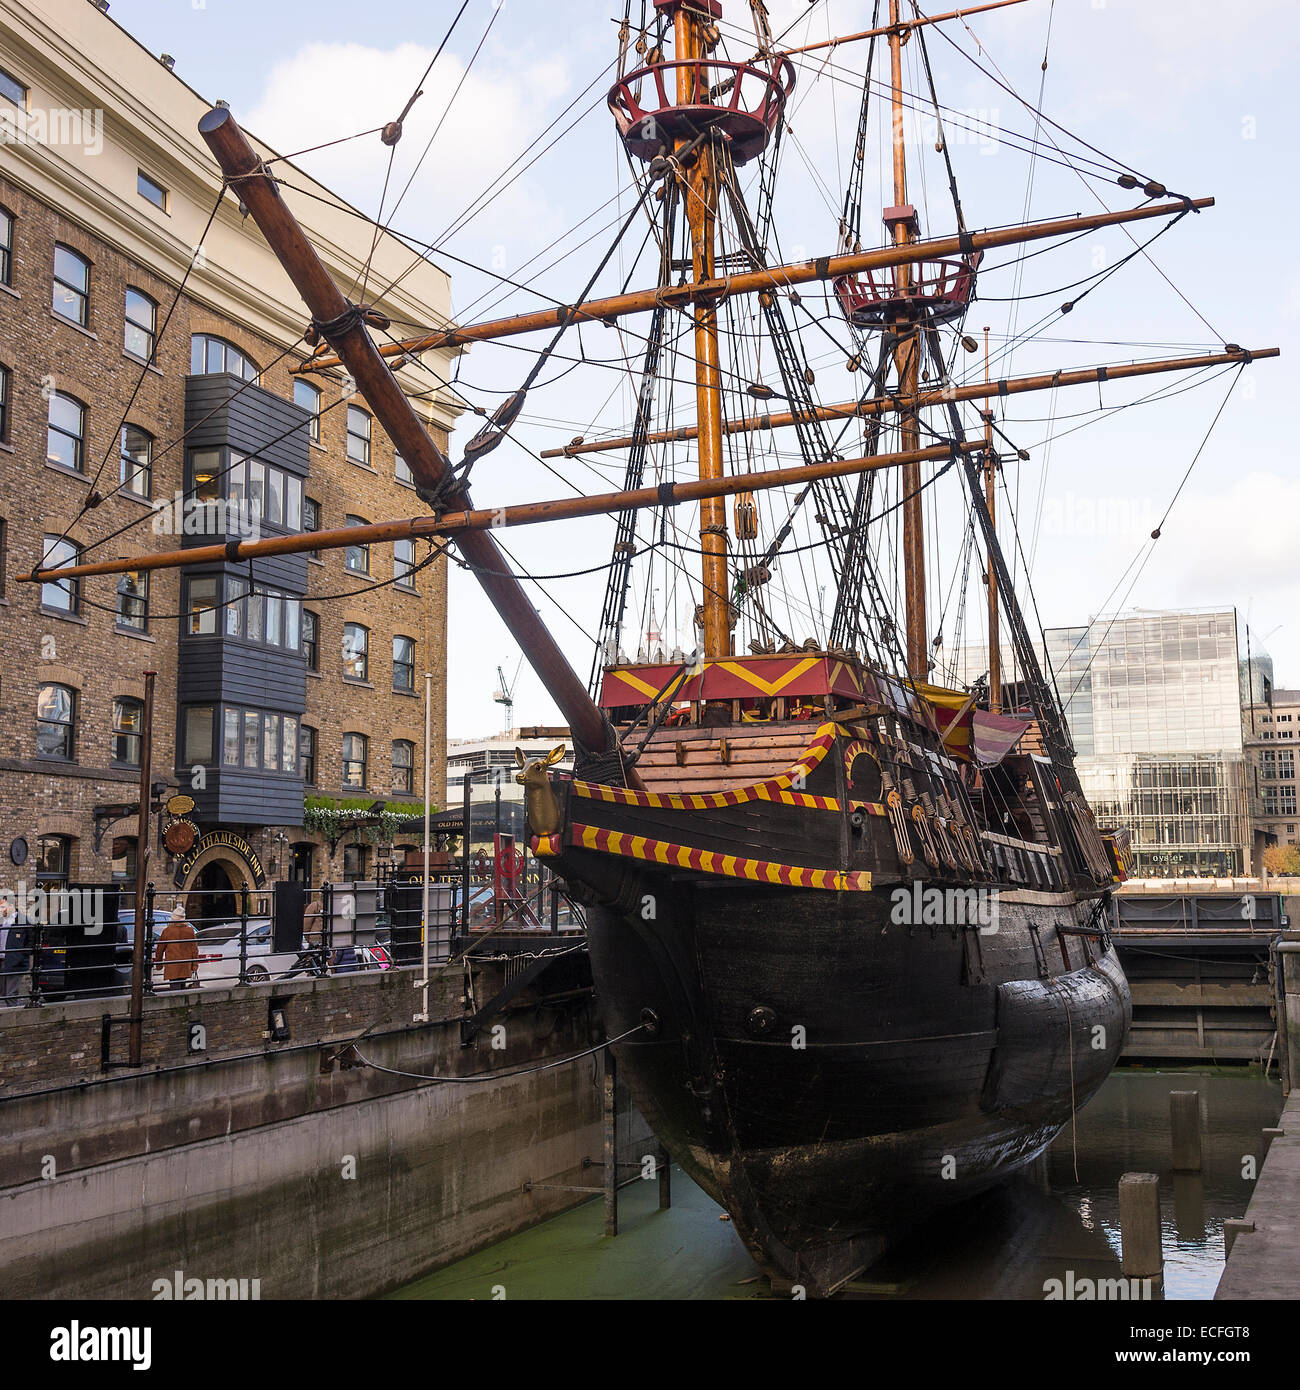 A Replica of The Golden Hinde Galleon Docked at Pickfords Wharf in River Thames at Southwark London England United Kingdom UK Stock Photo